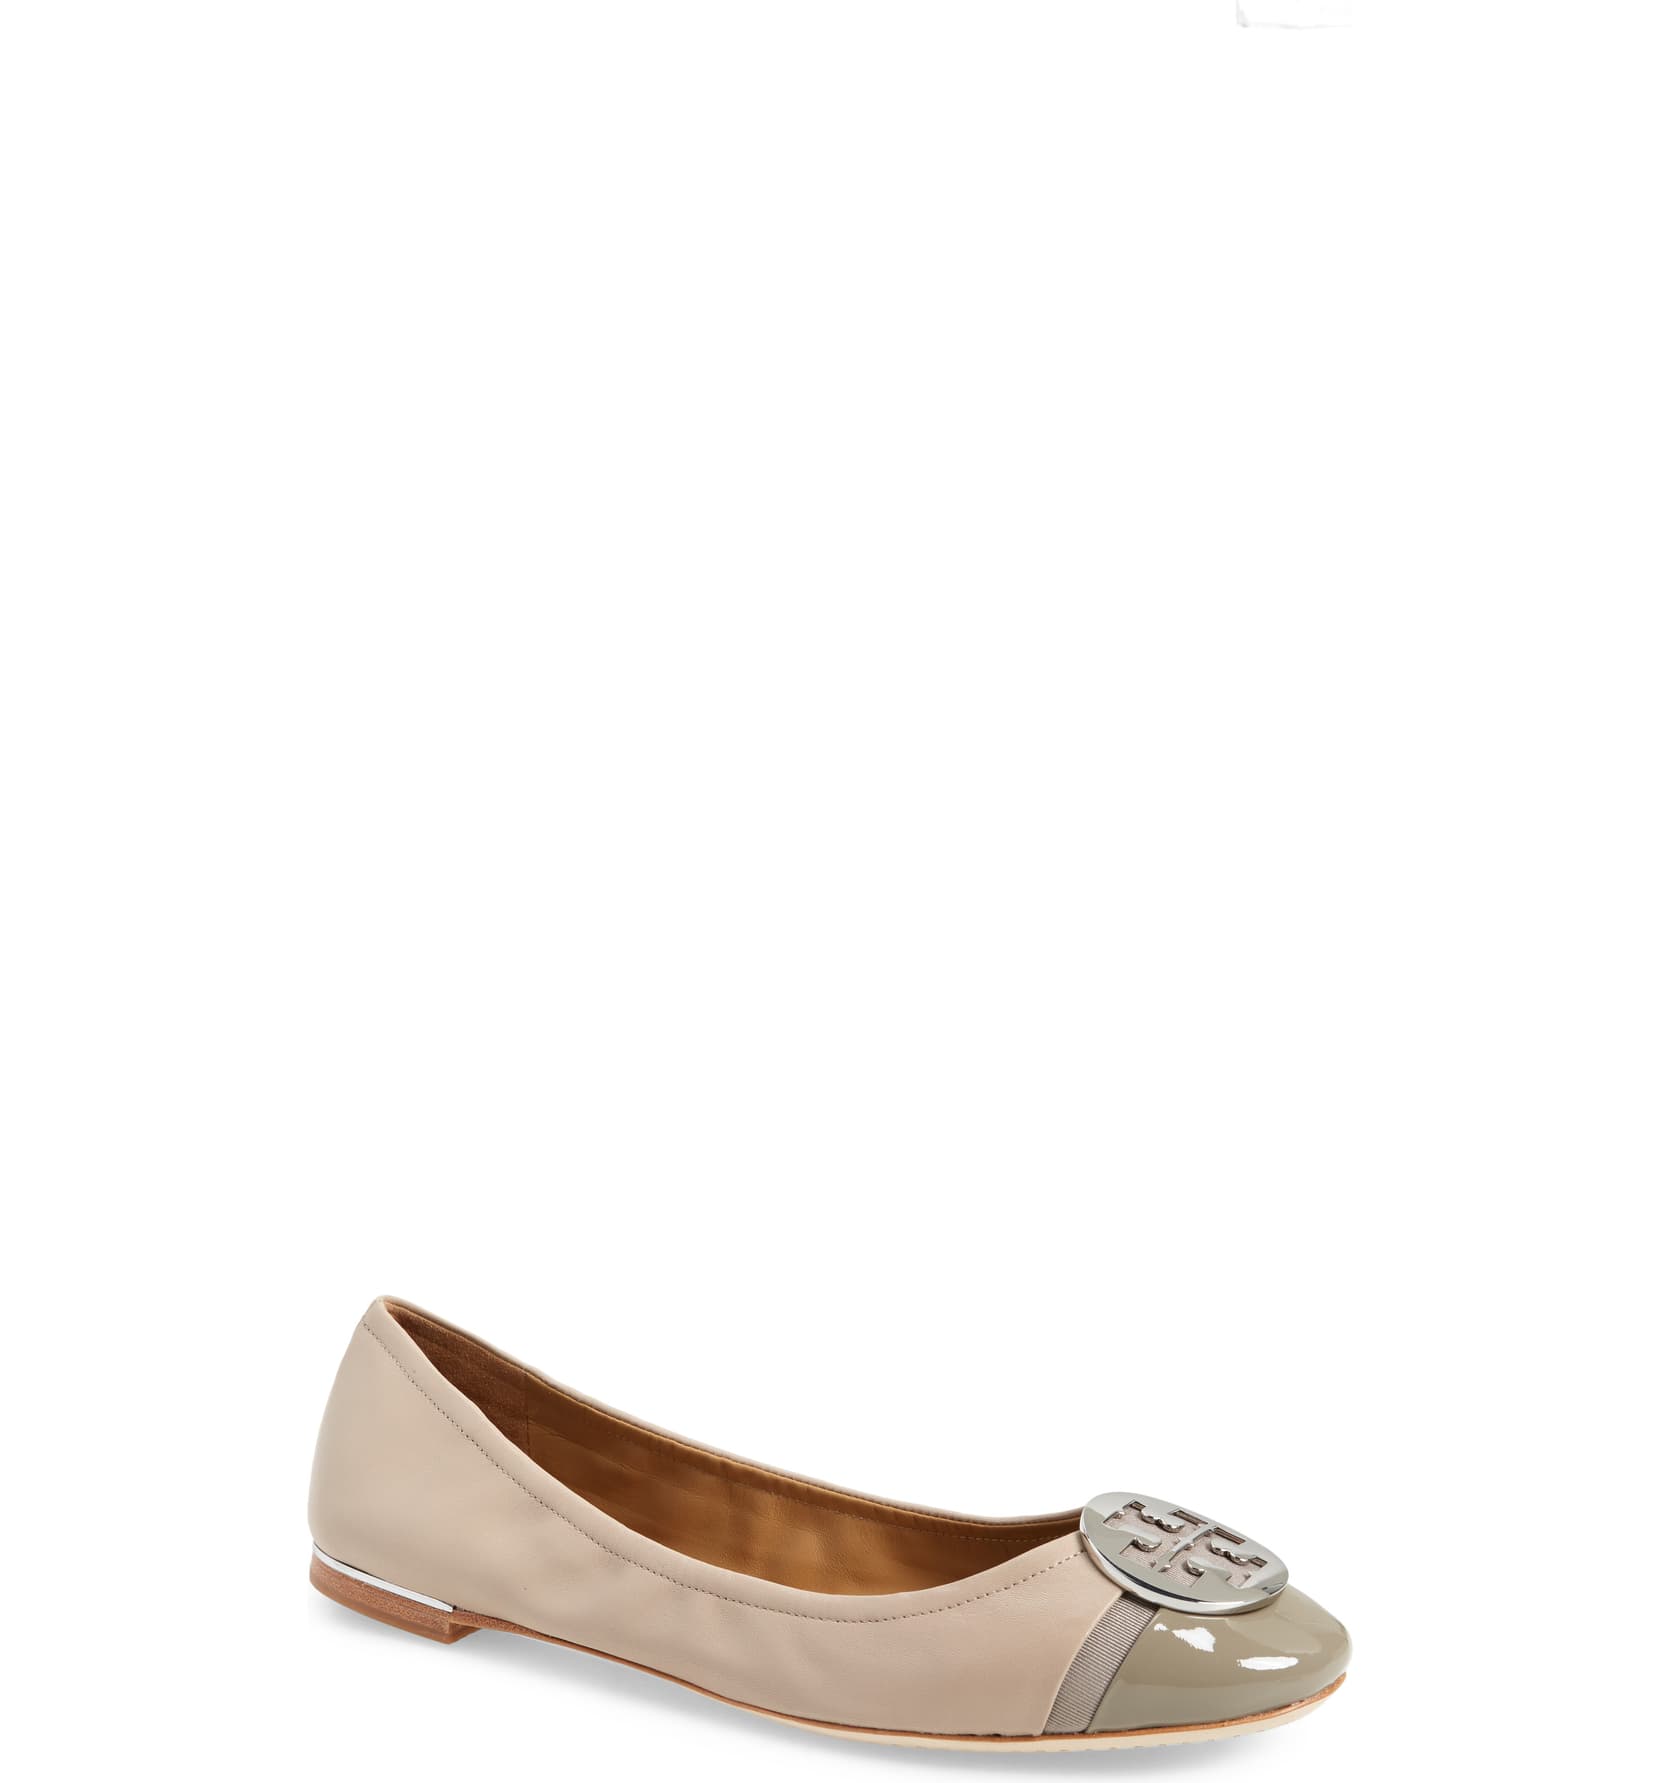 tory burch taupe flats